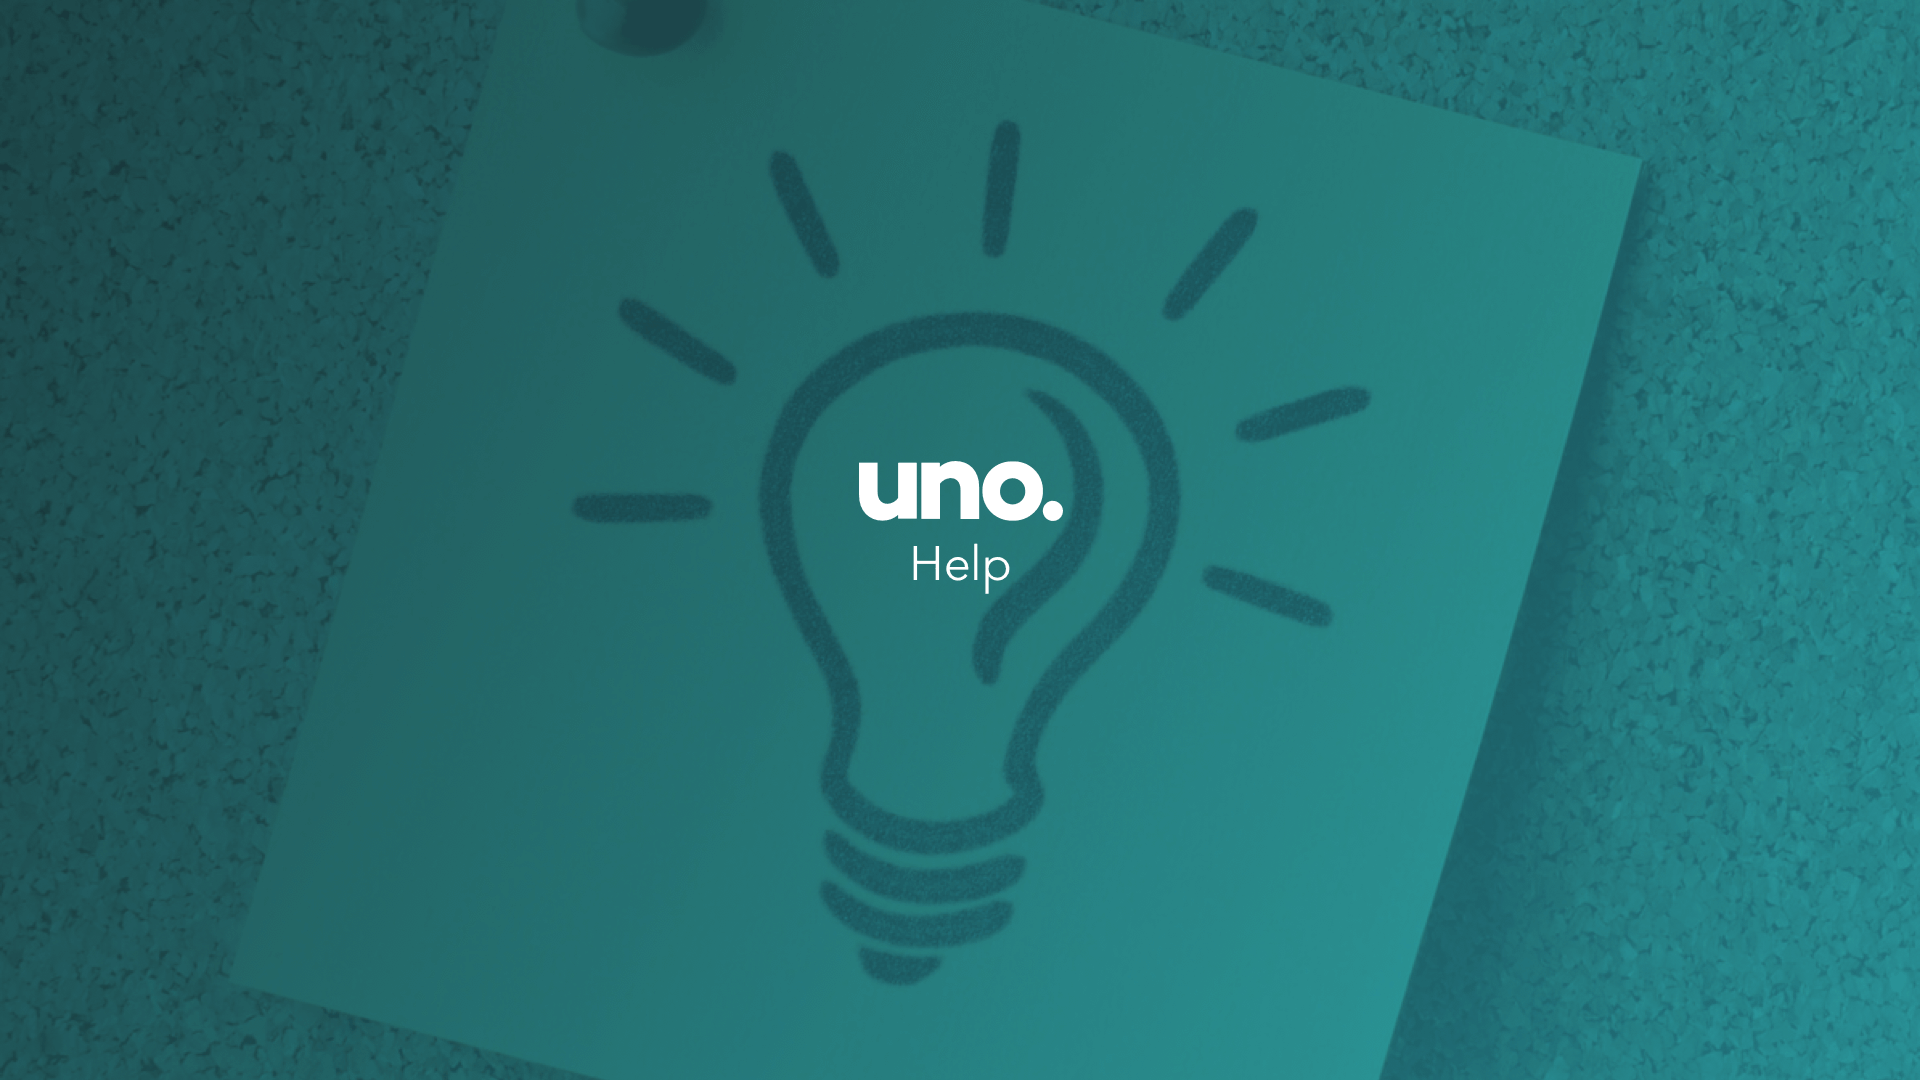 What documents will I need to share with uno when applying online?